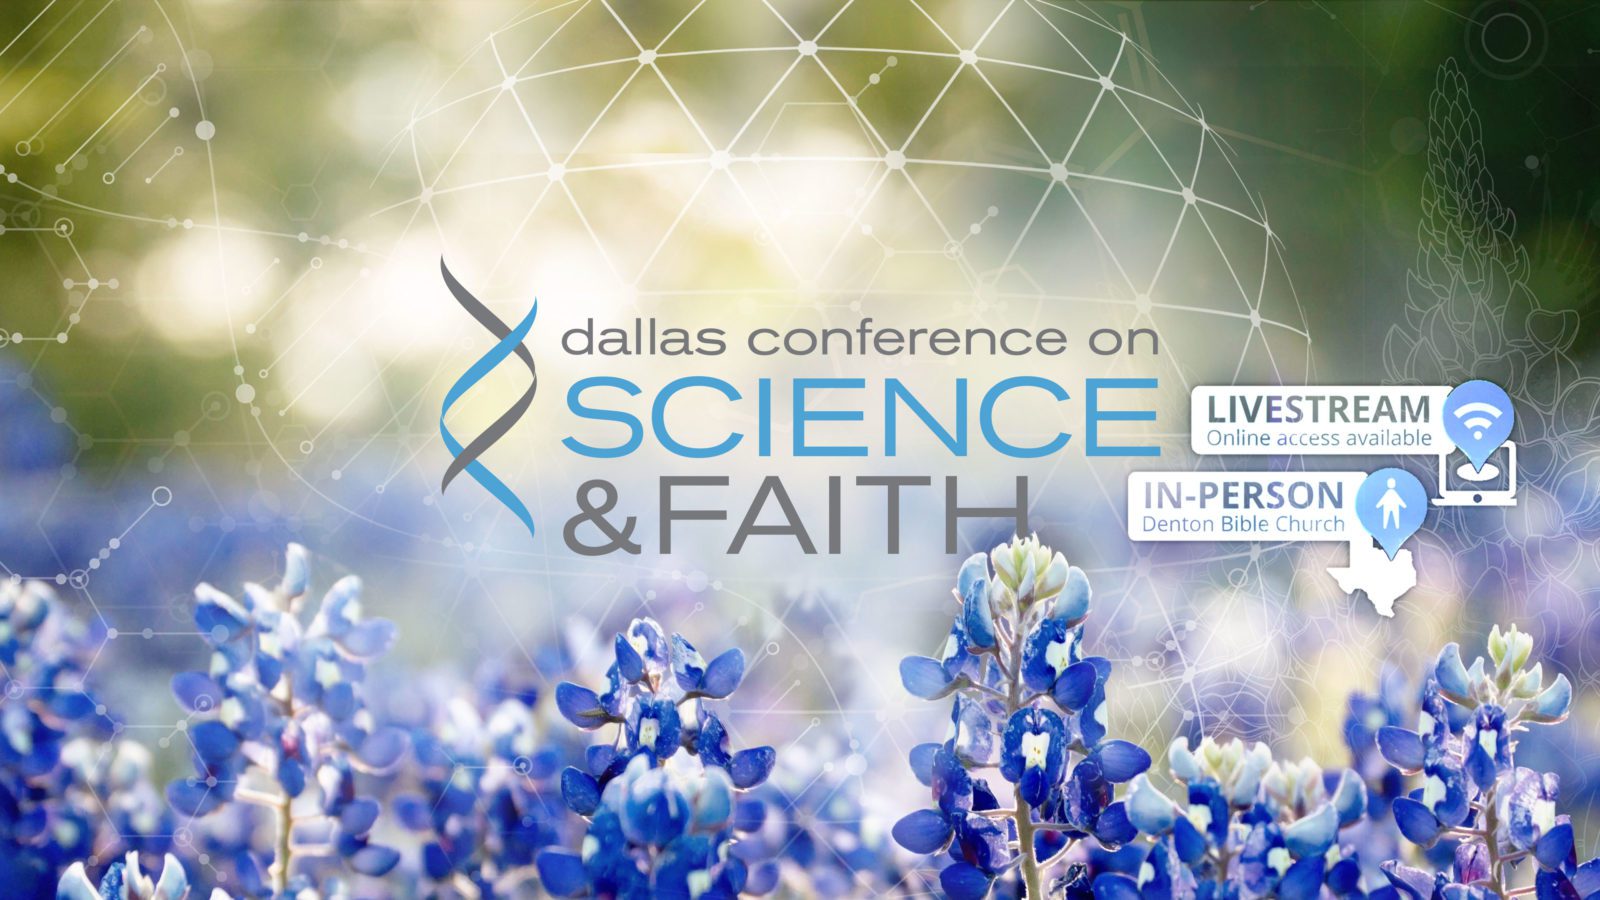 Dallas conference on science and faith